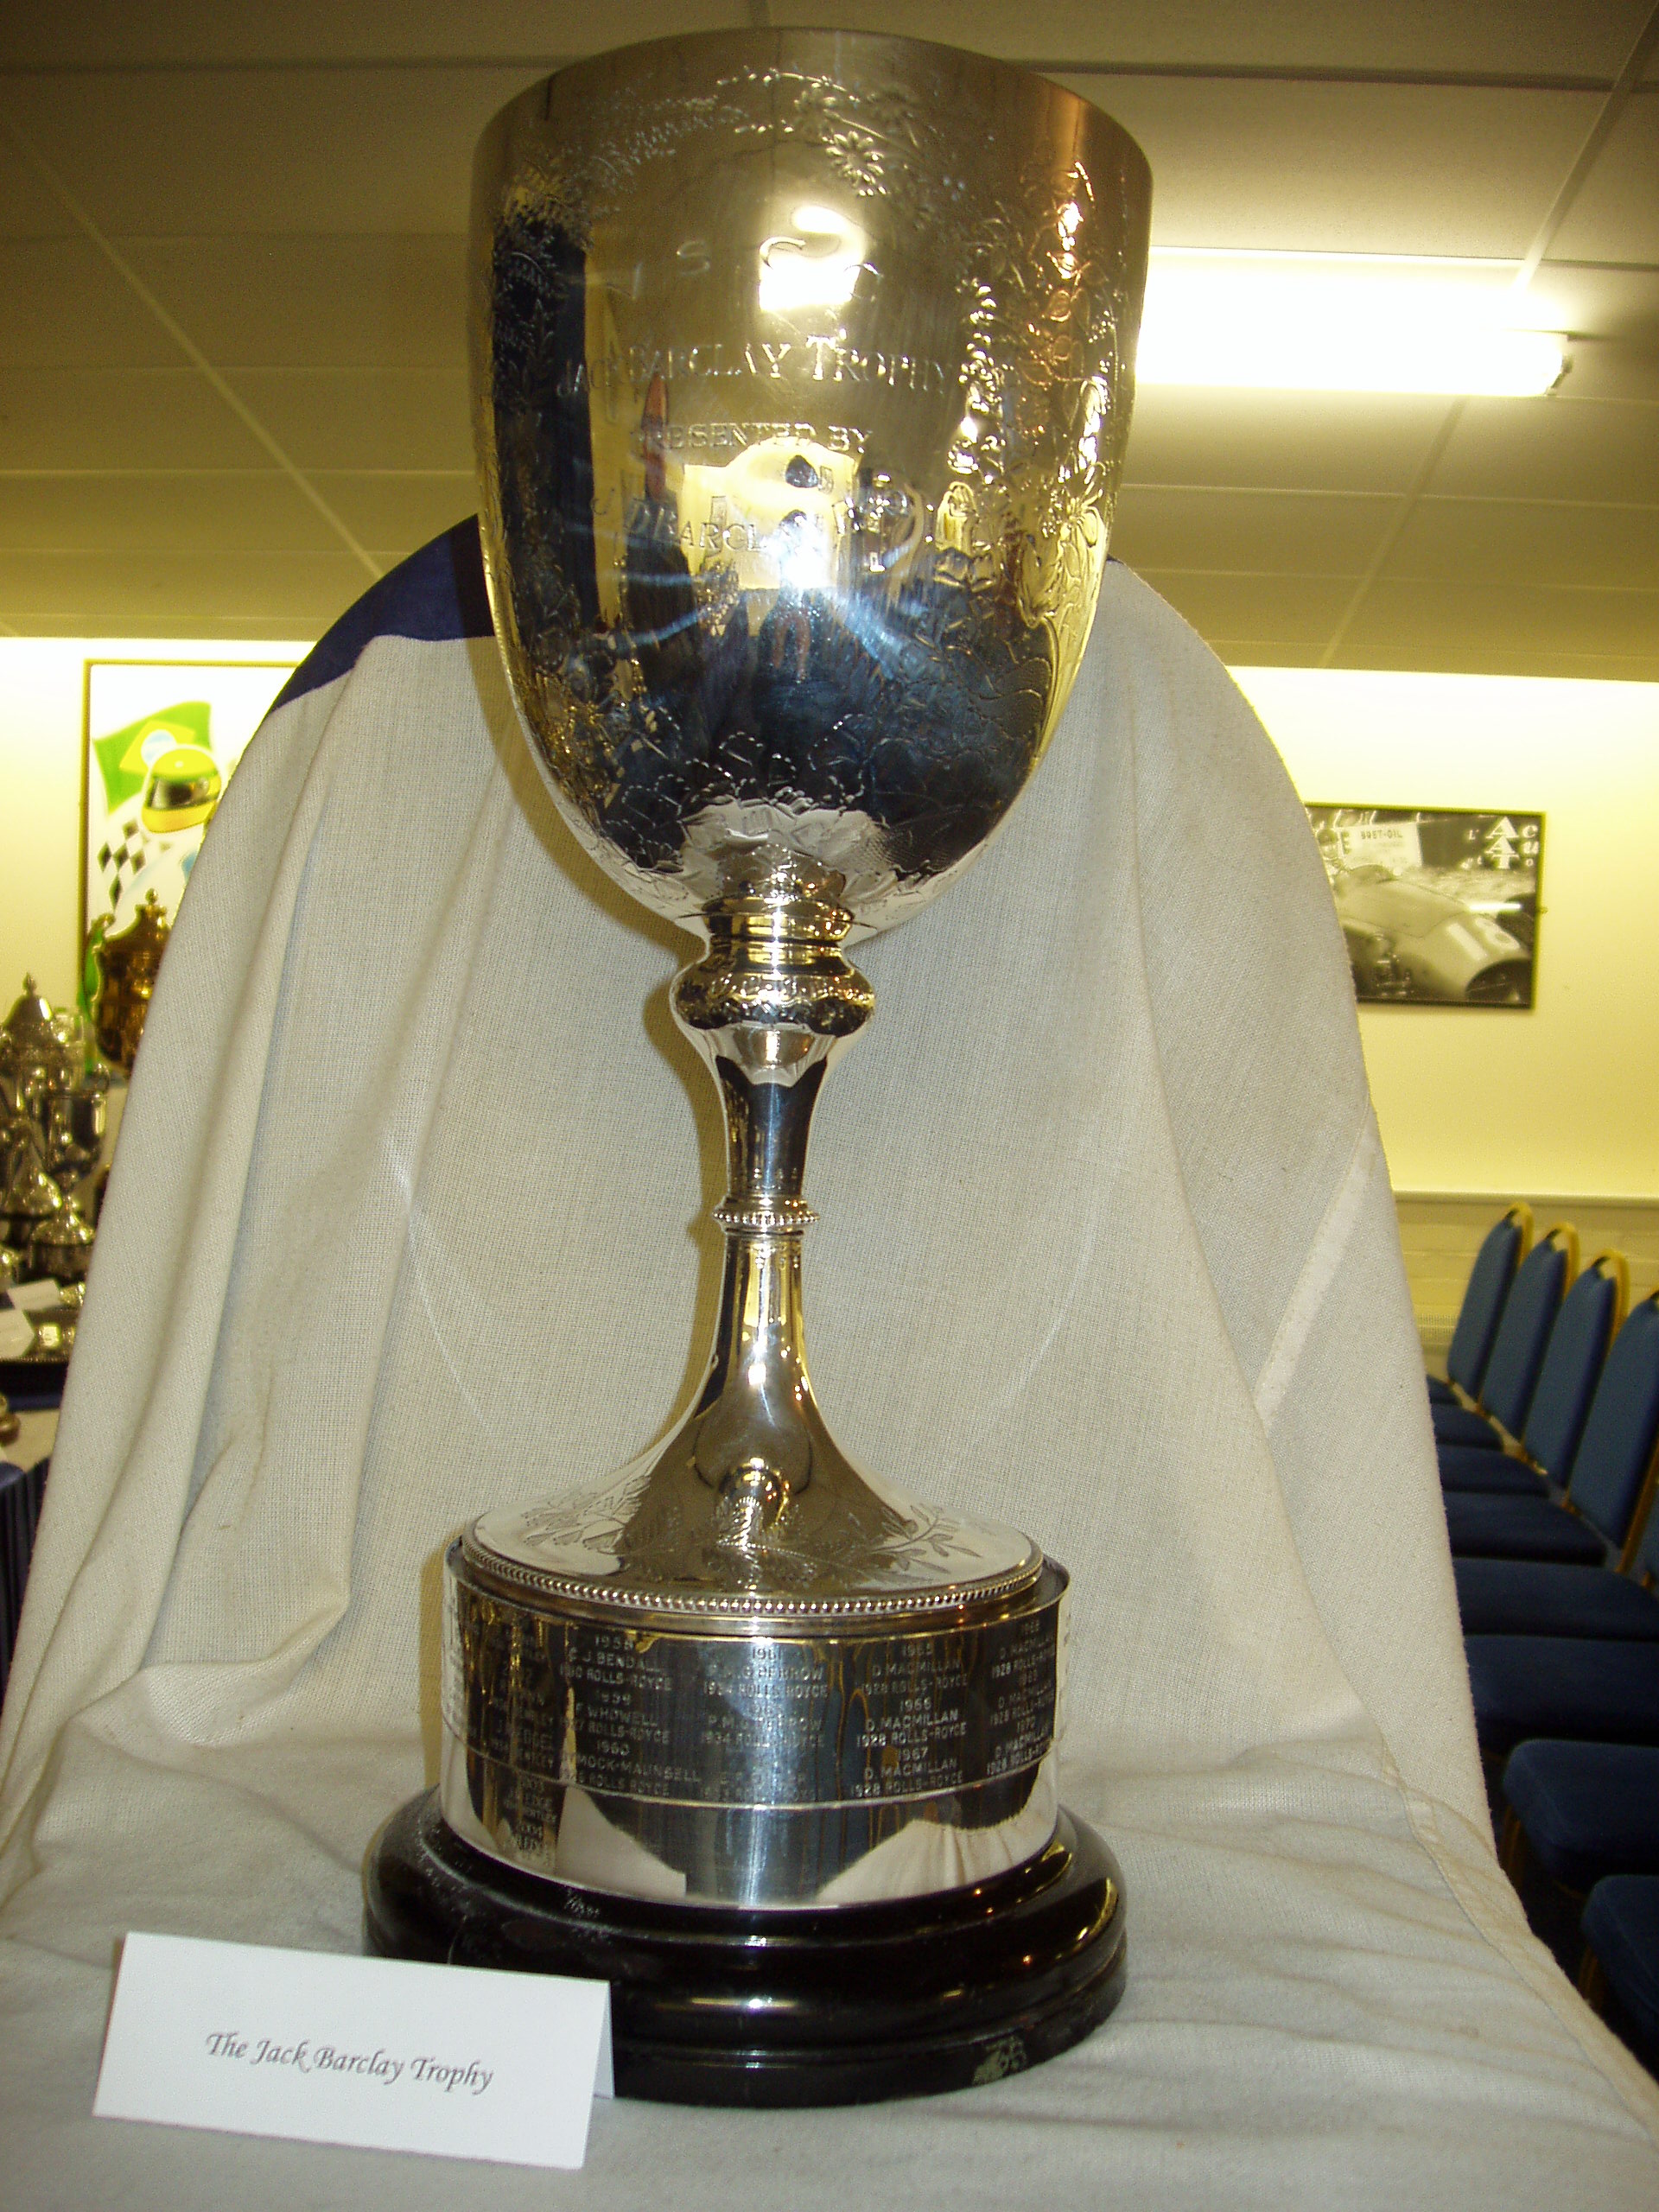 JACK BARCLAY TROPHY cover